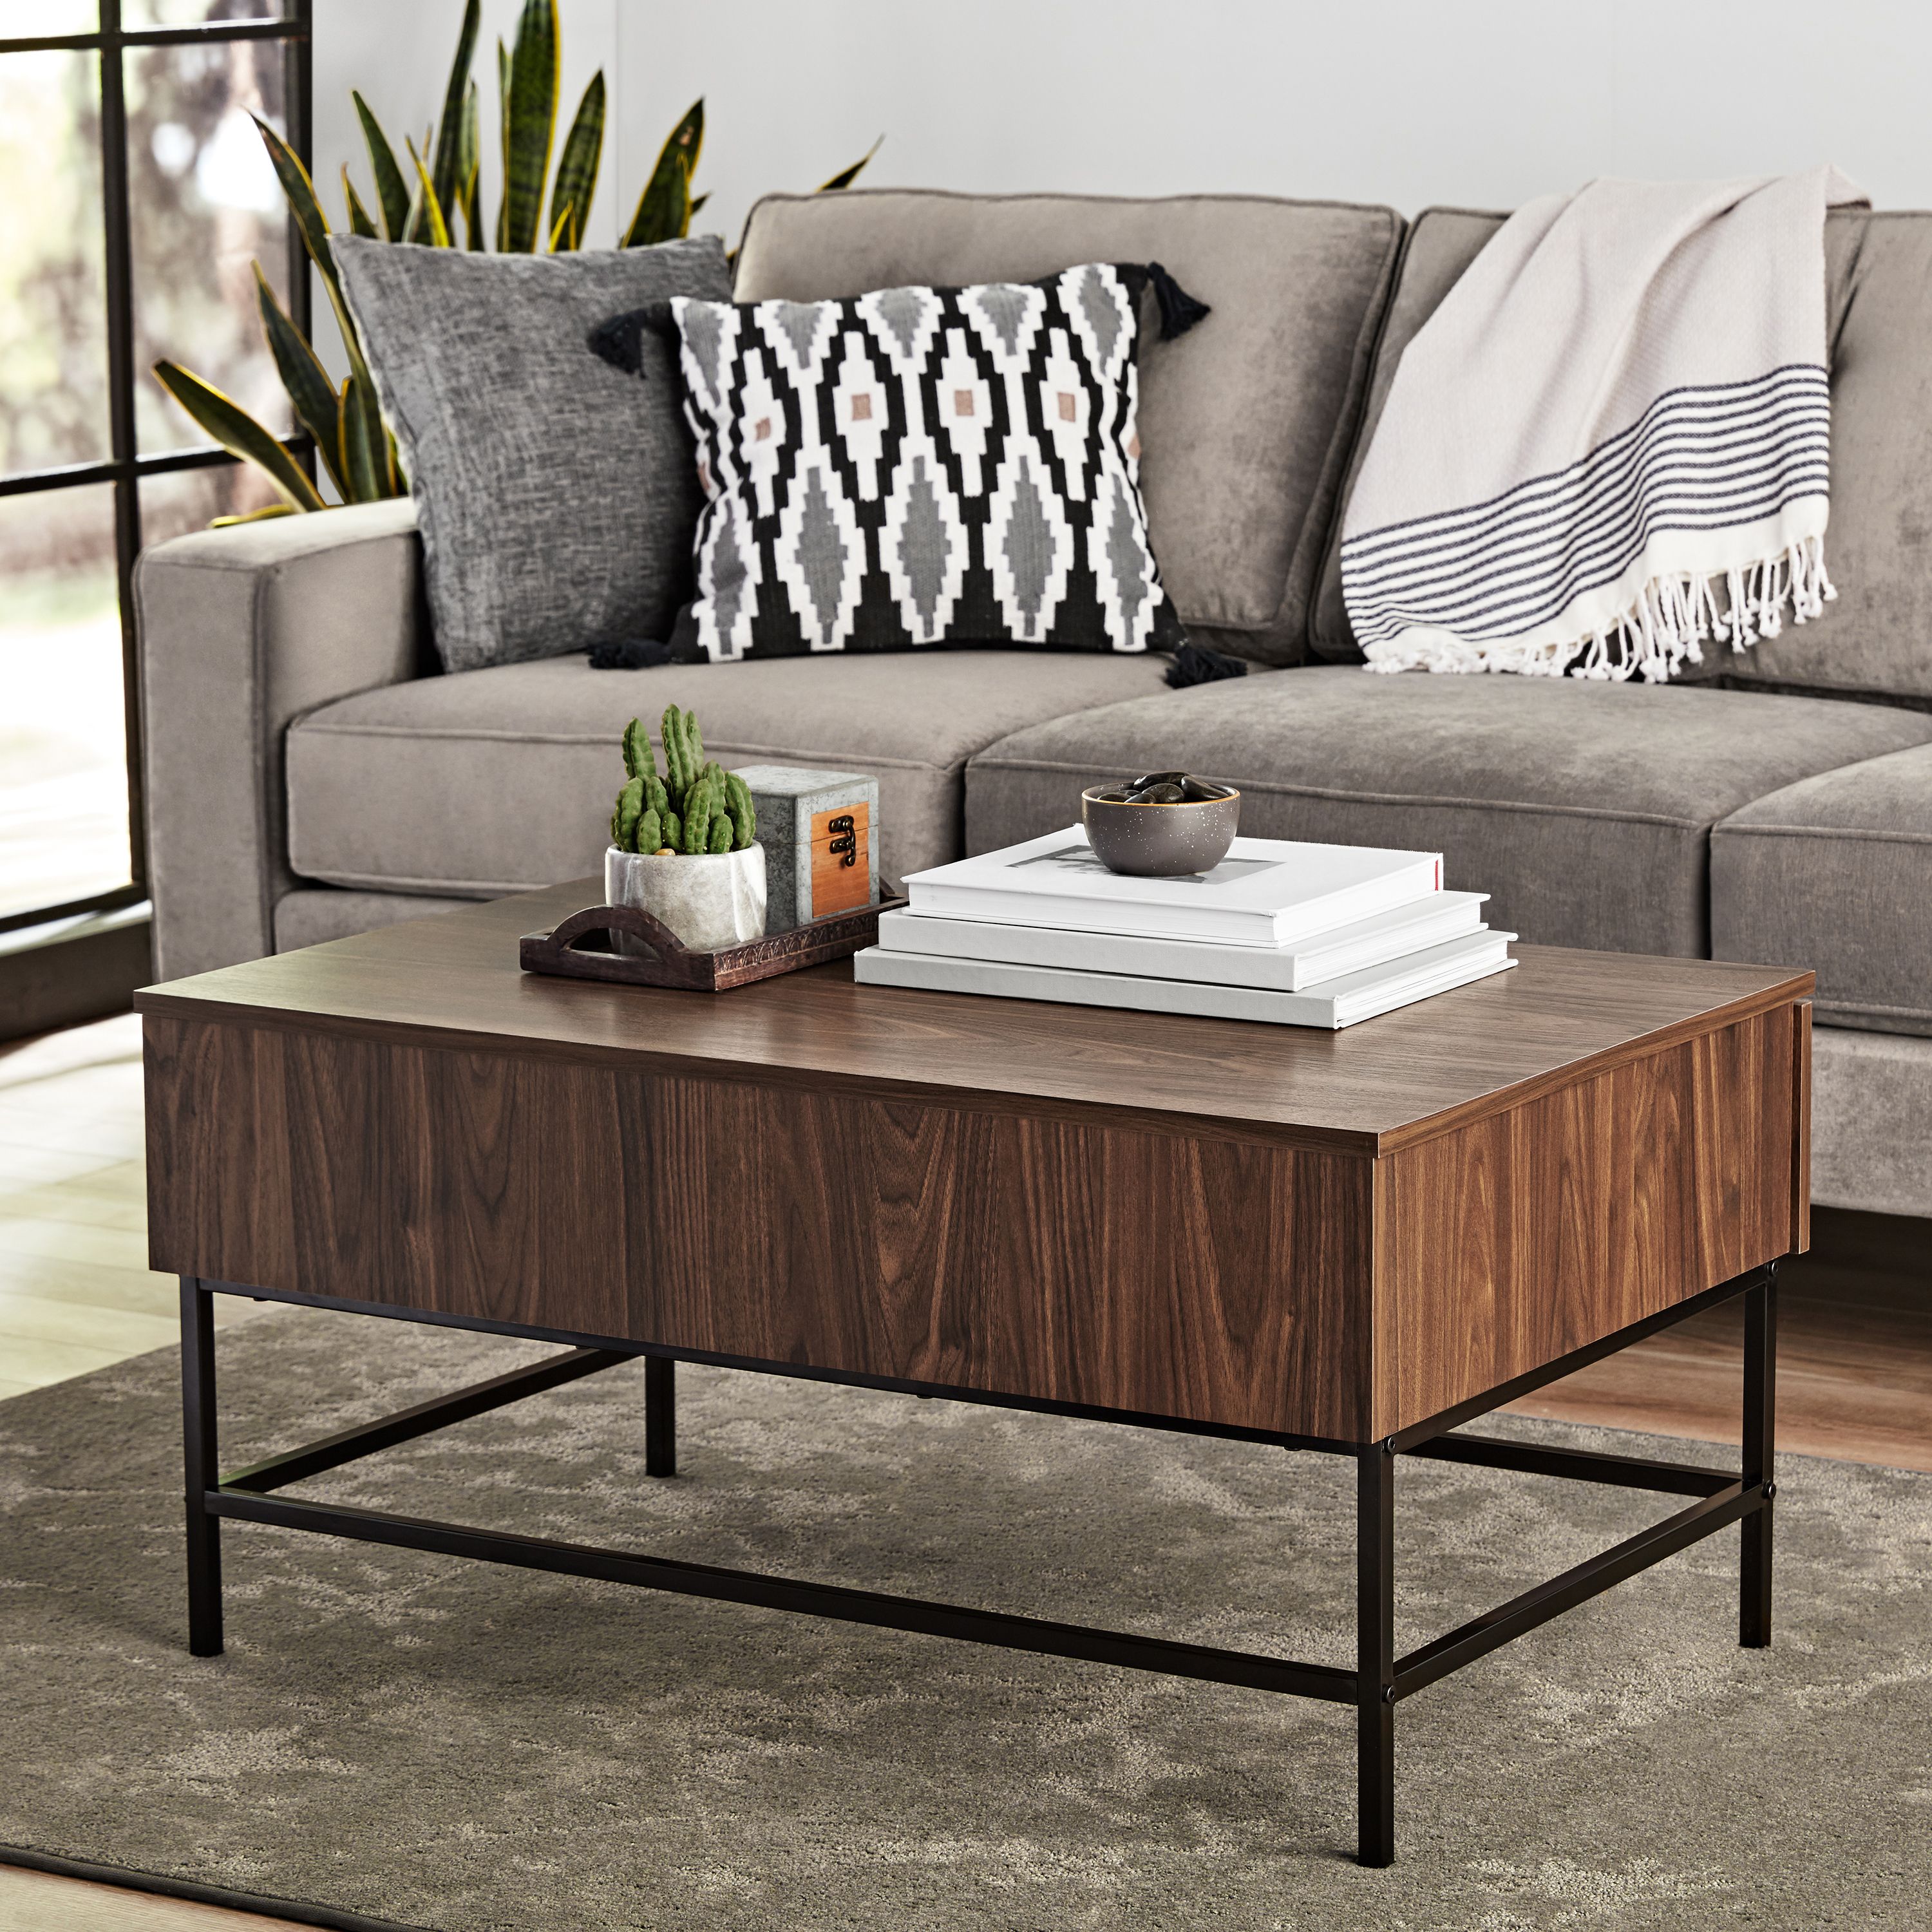 Mainstays Sumpter Park Coffee Table, Multiple Finishes - image 1 of 6